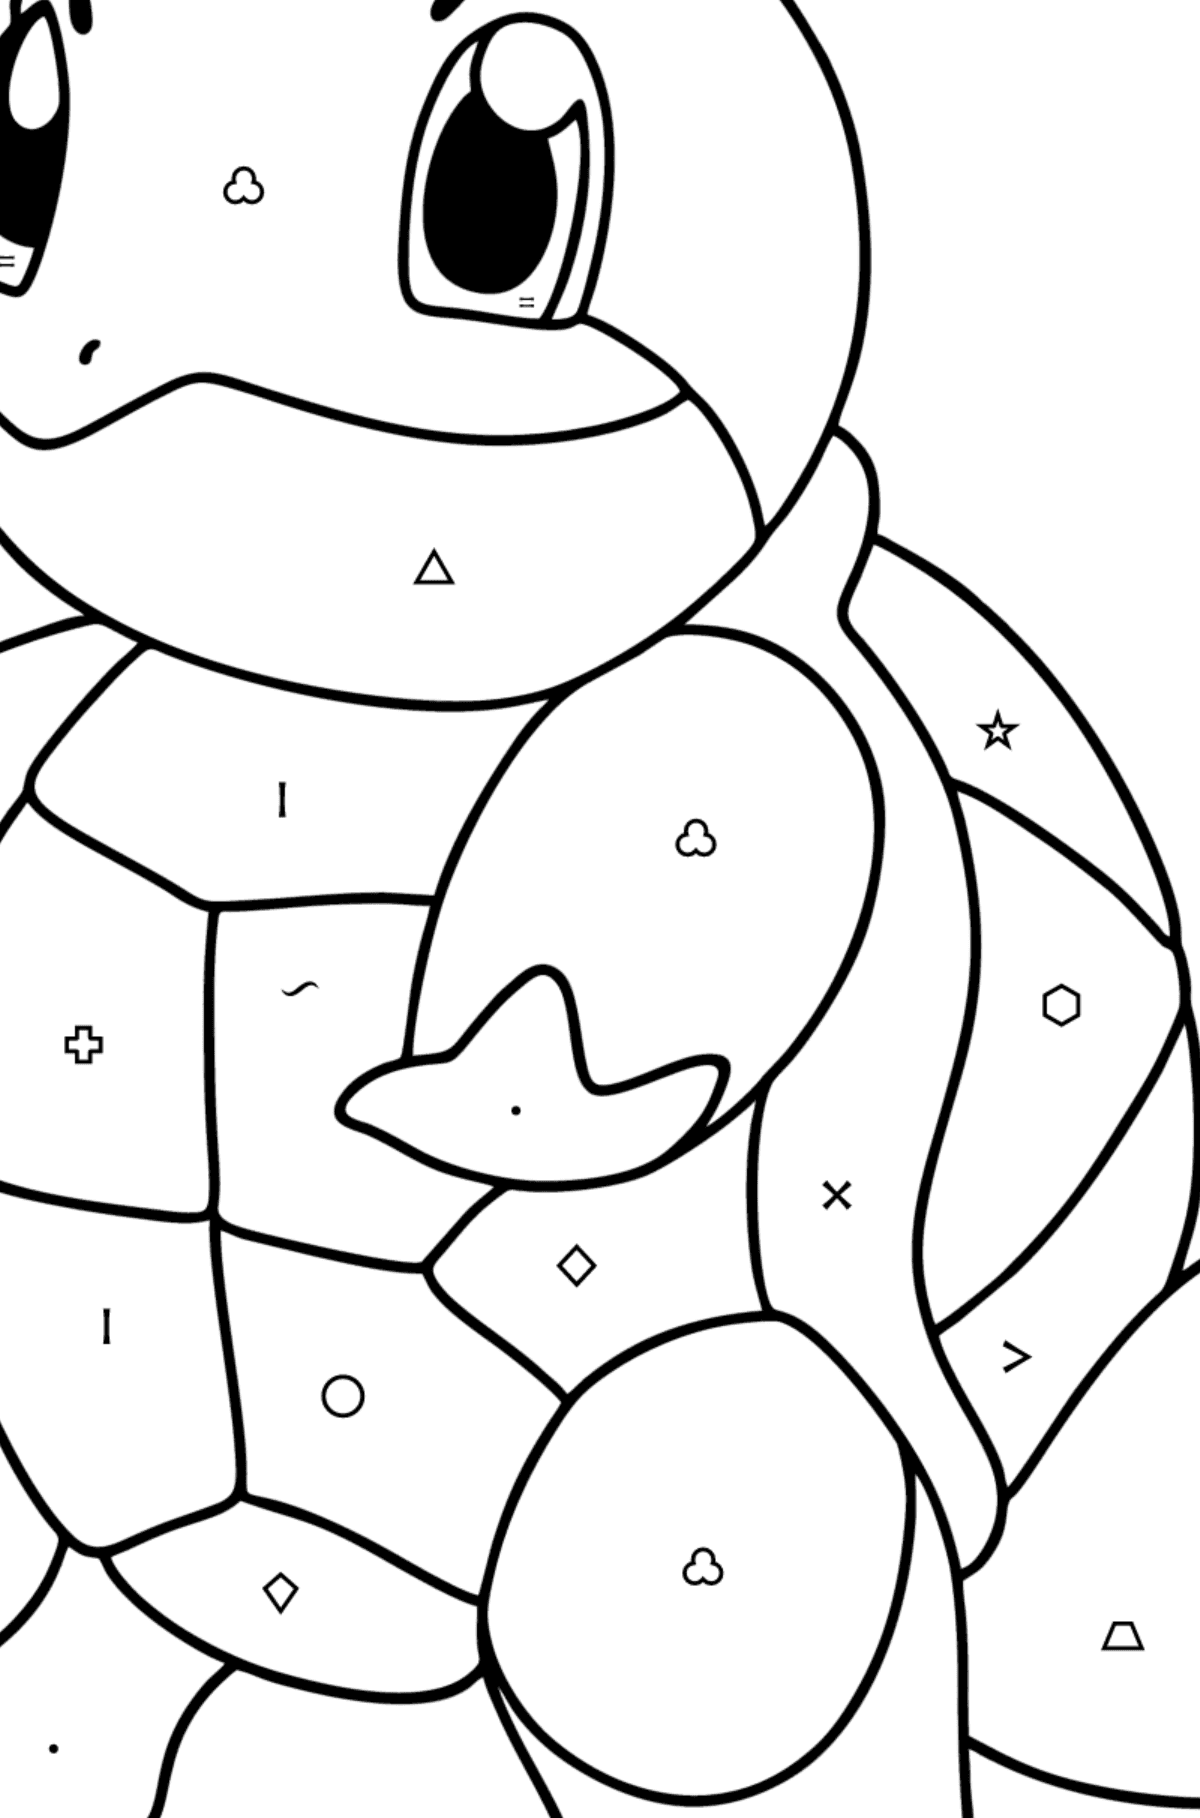 Coloring page Pokémon Go Squirtle - Coloring by Symbols and Geometric Shapes for Kids